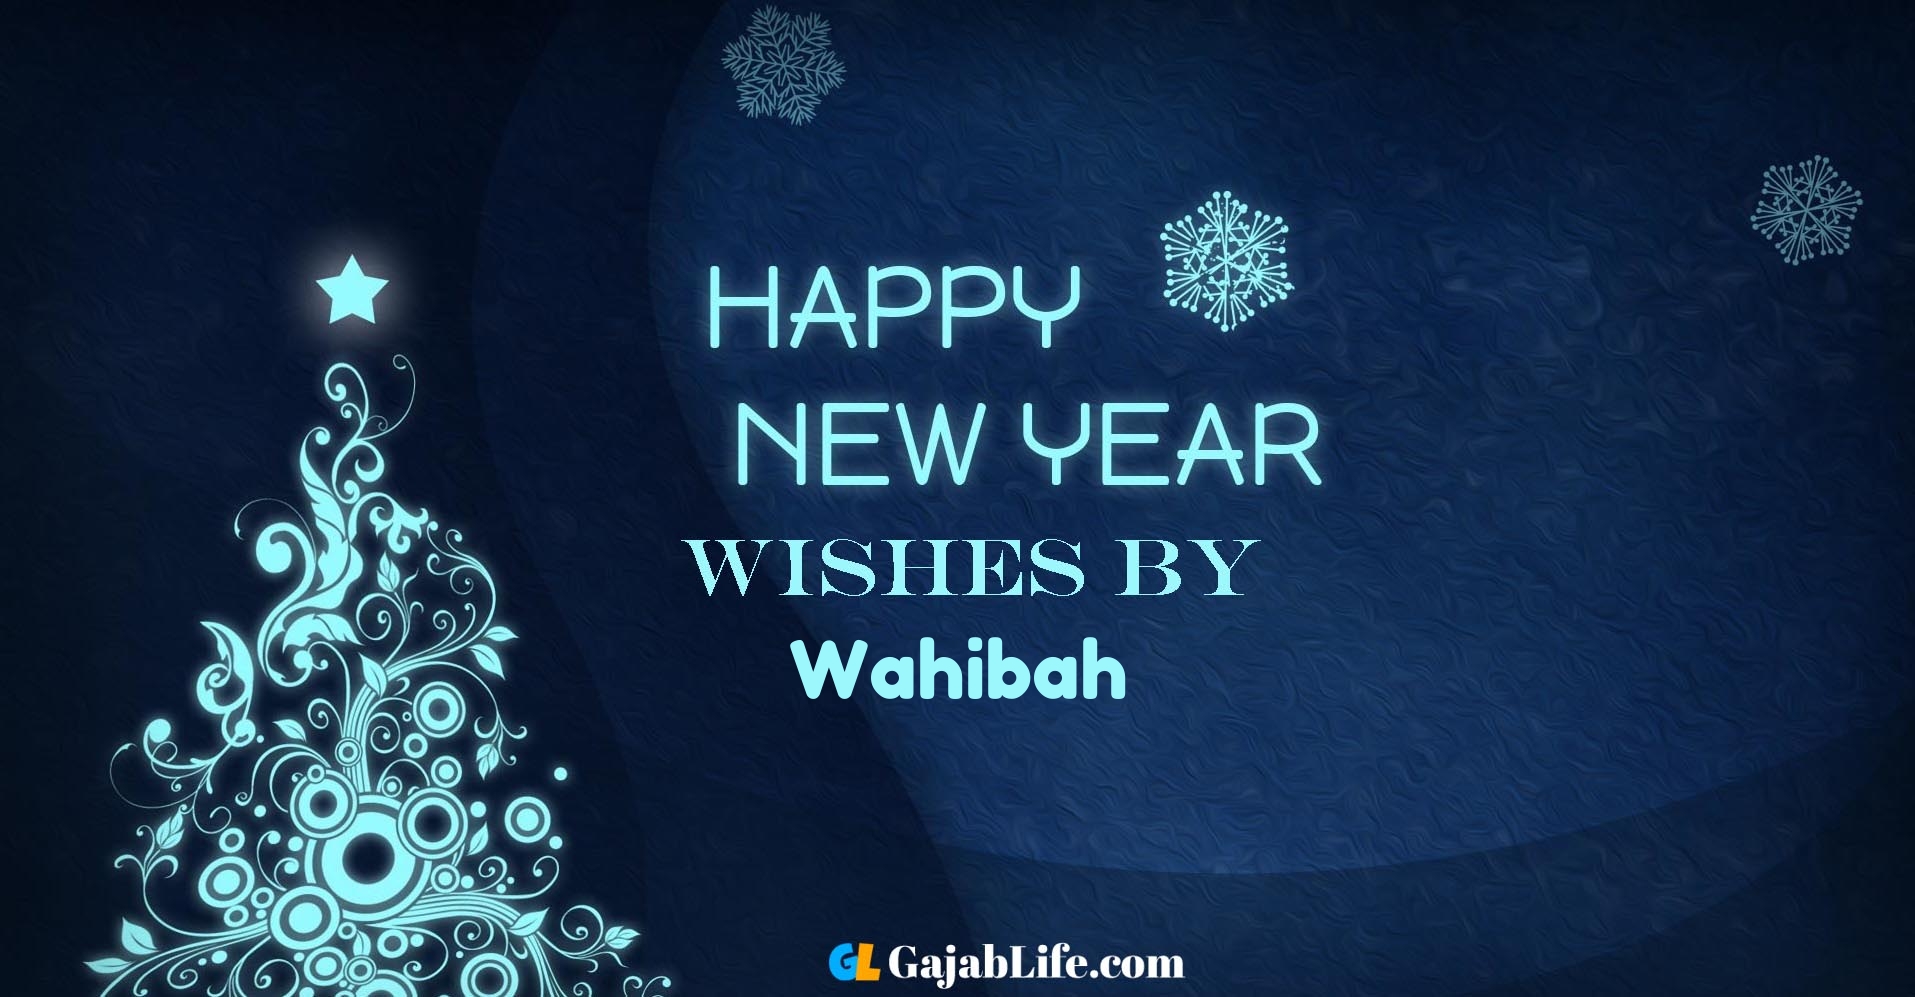 Happy new year wishes wahibah